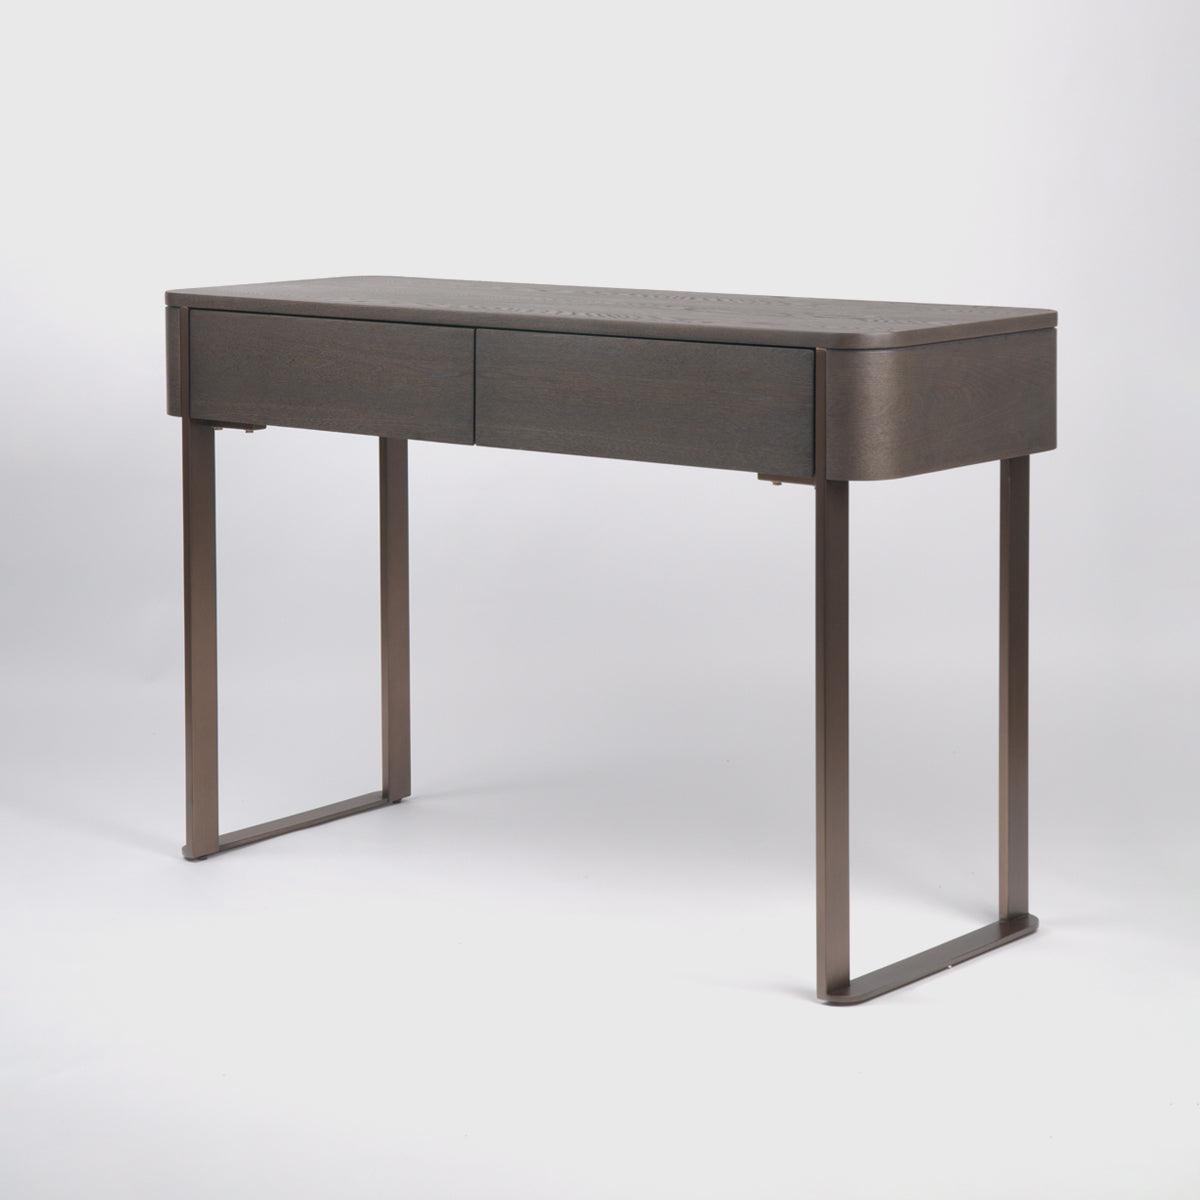 Lizzi 2 Drawer Chocolate Oak Console Table by Eccotrading Design London - Maison Rêves UK